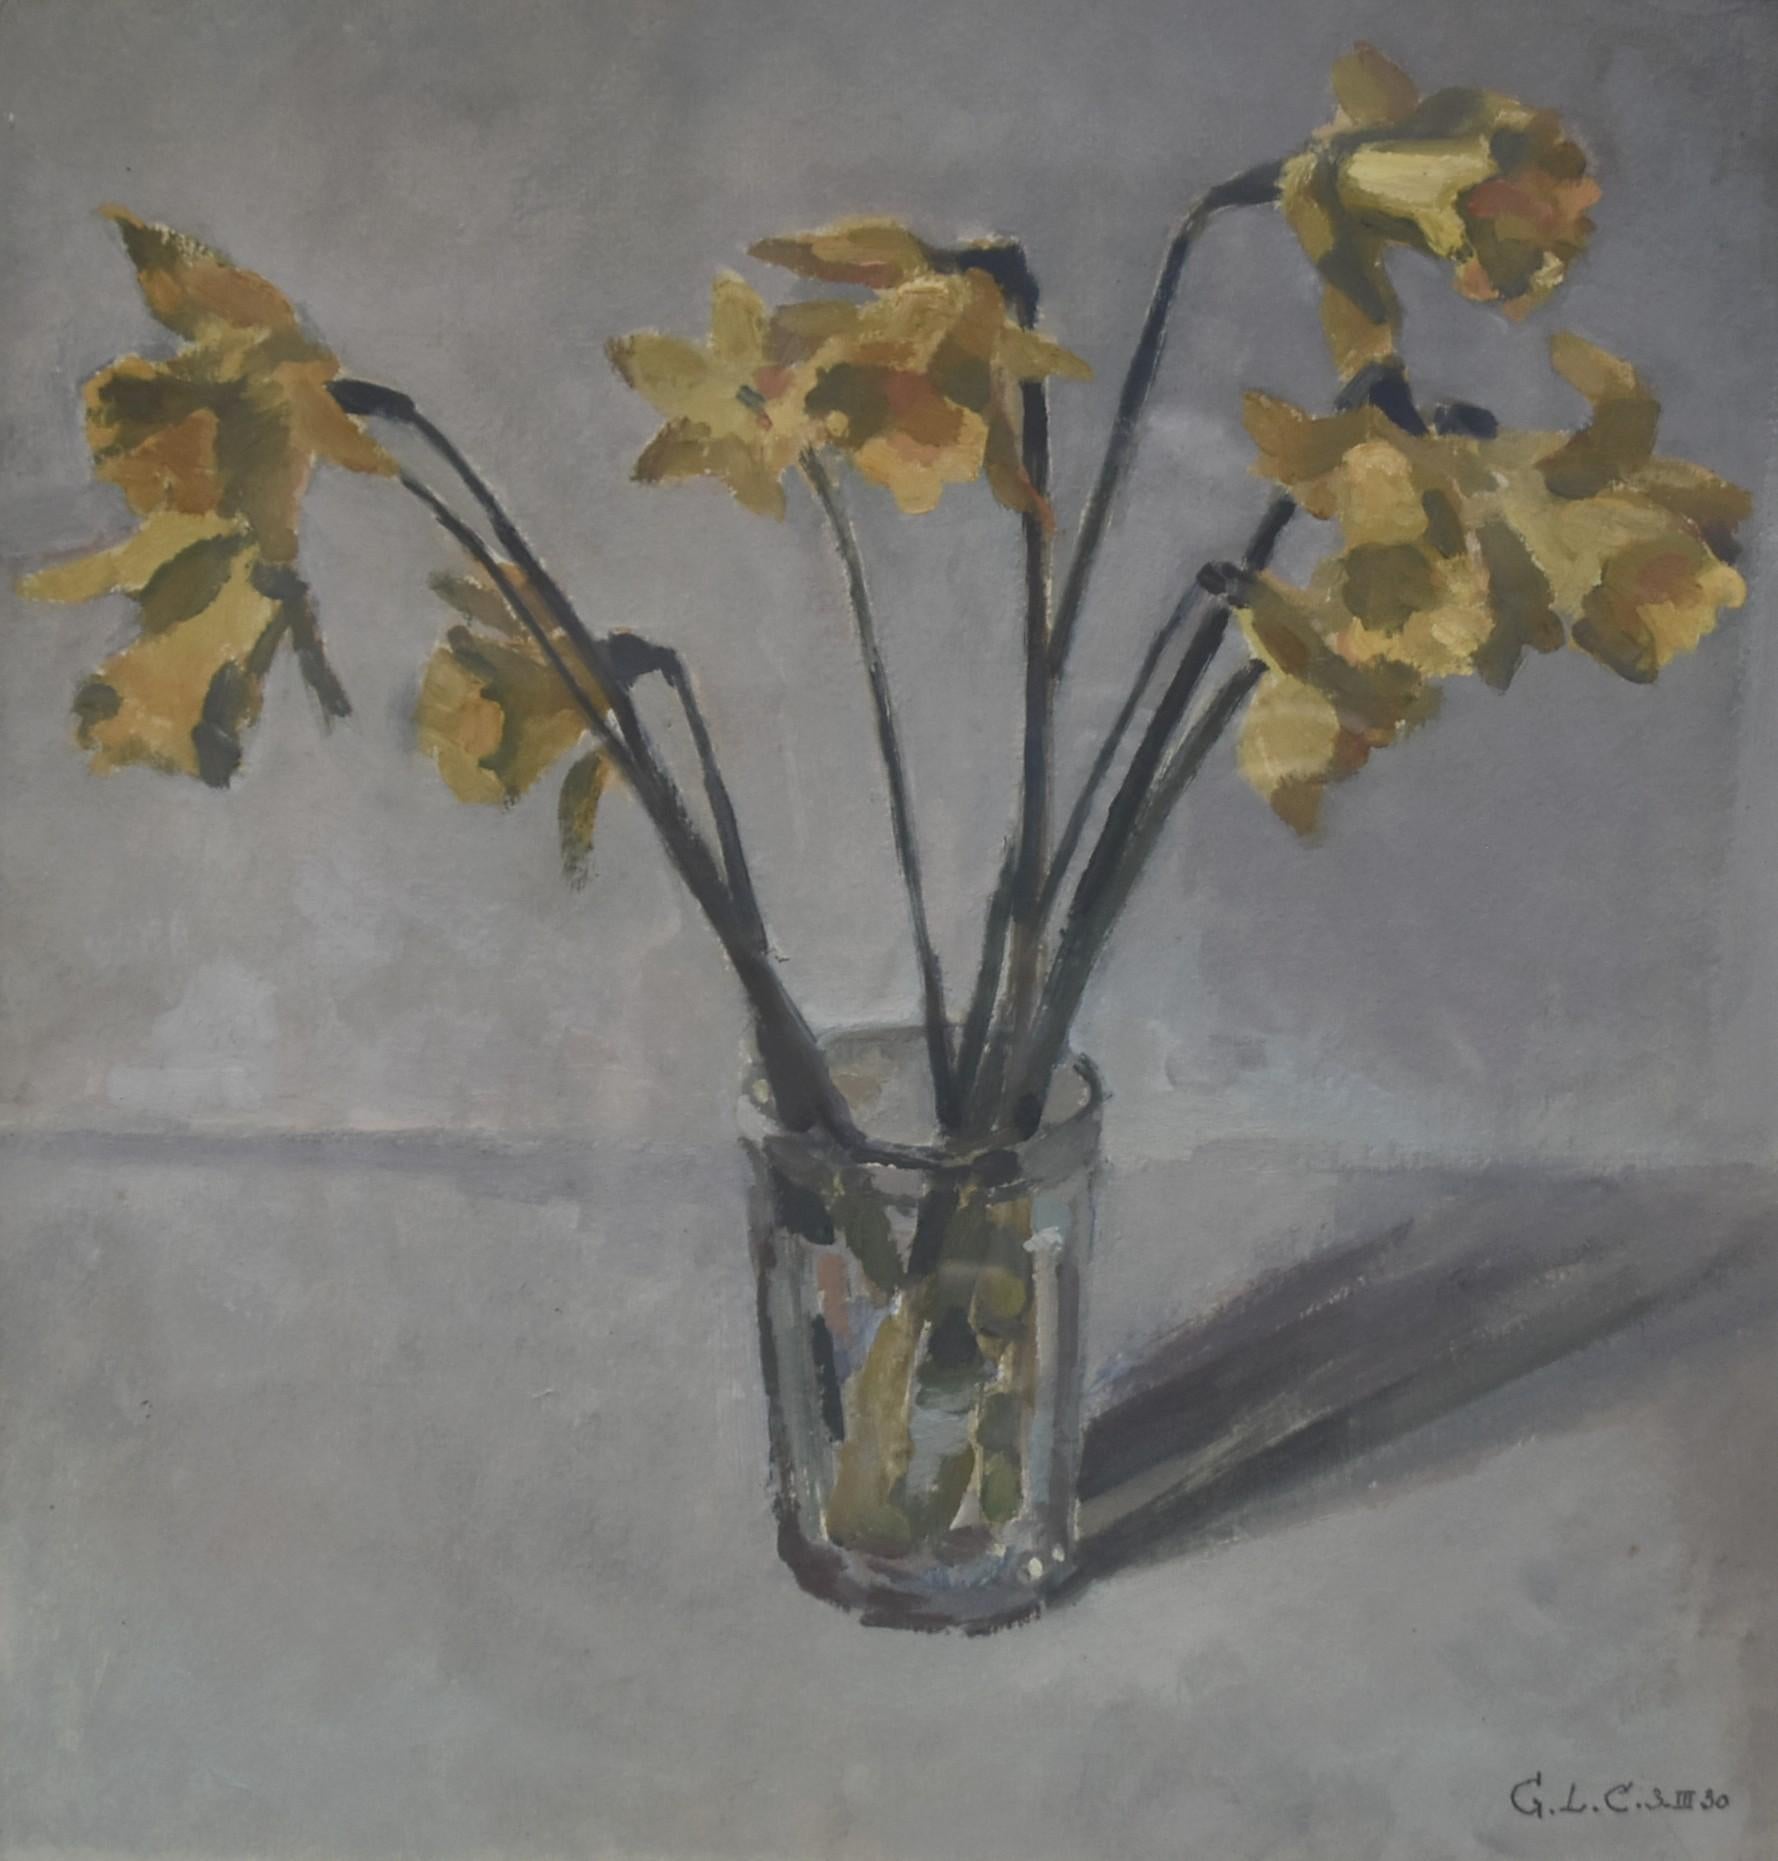 Georges Louis Claude (1879-1963)
Daffodils in a vase, 1930
Signed and dated  "GLC 3 III 30" lower right
oil on paper 
35.5 x 34 cm
In good condition a very tiny loss  of painting in the upper right corner barely visible
Framed under glass : 39 x 37